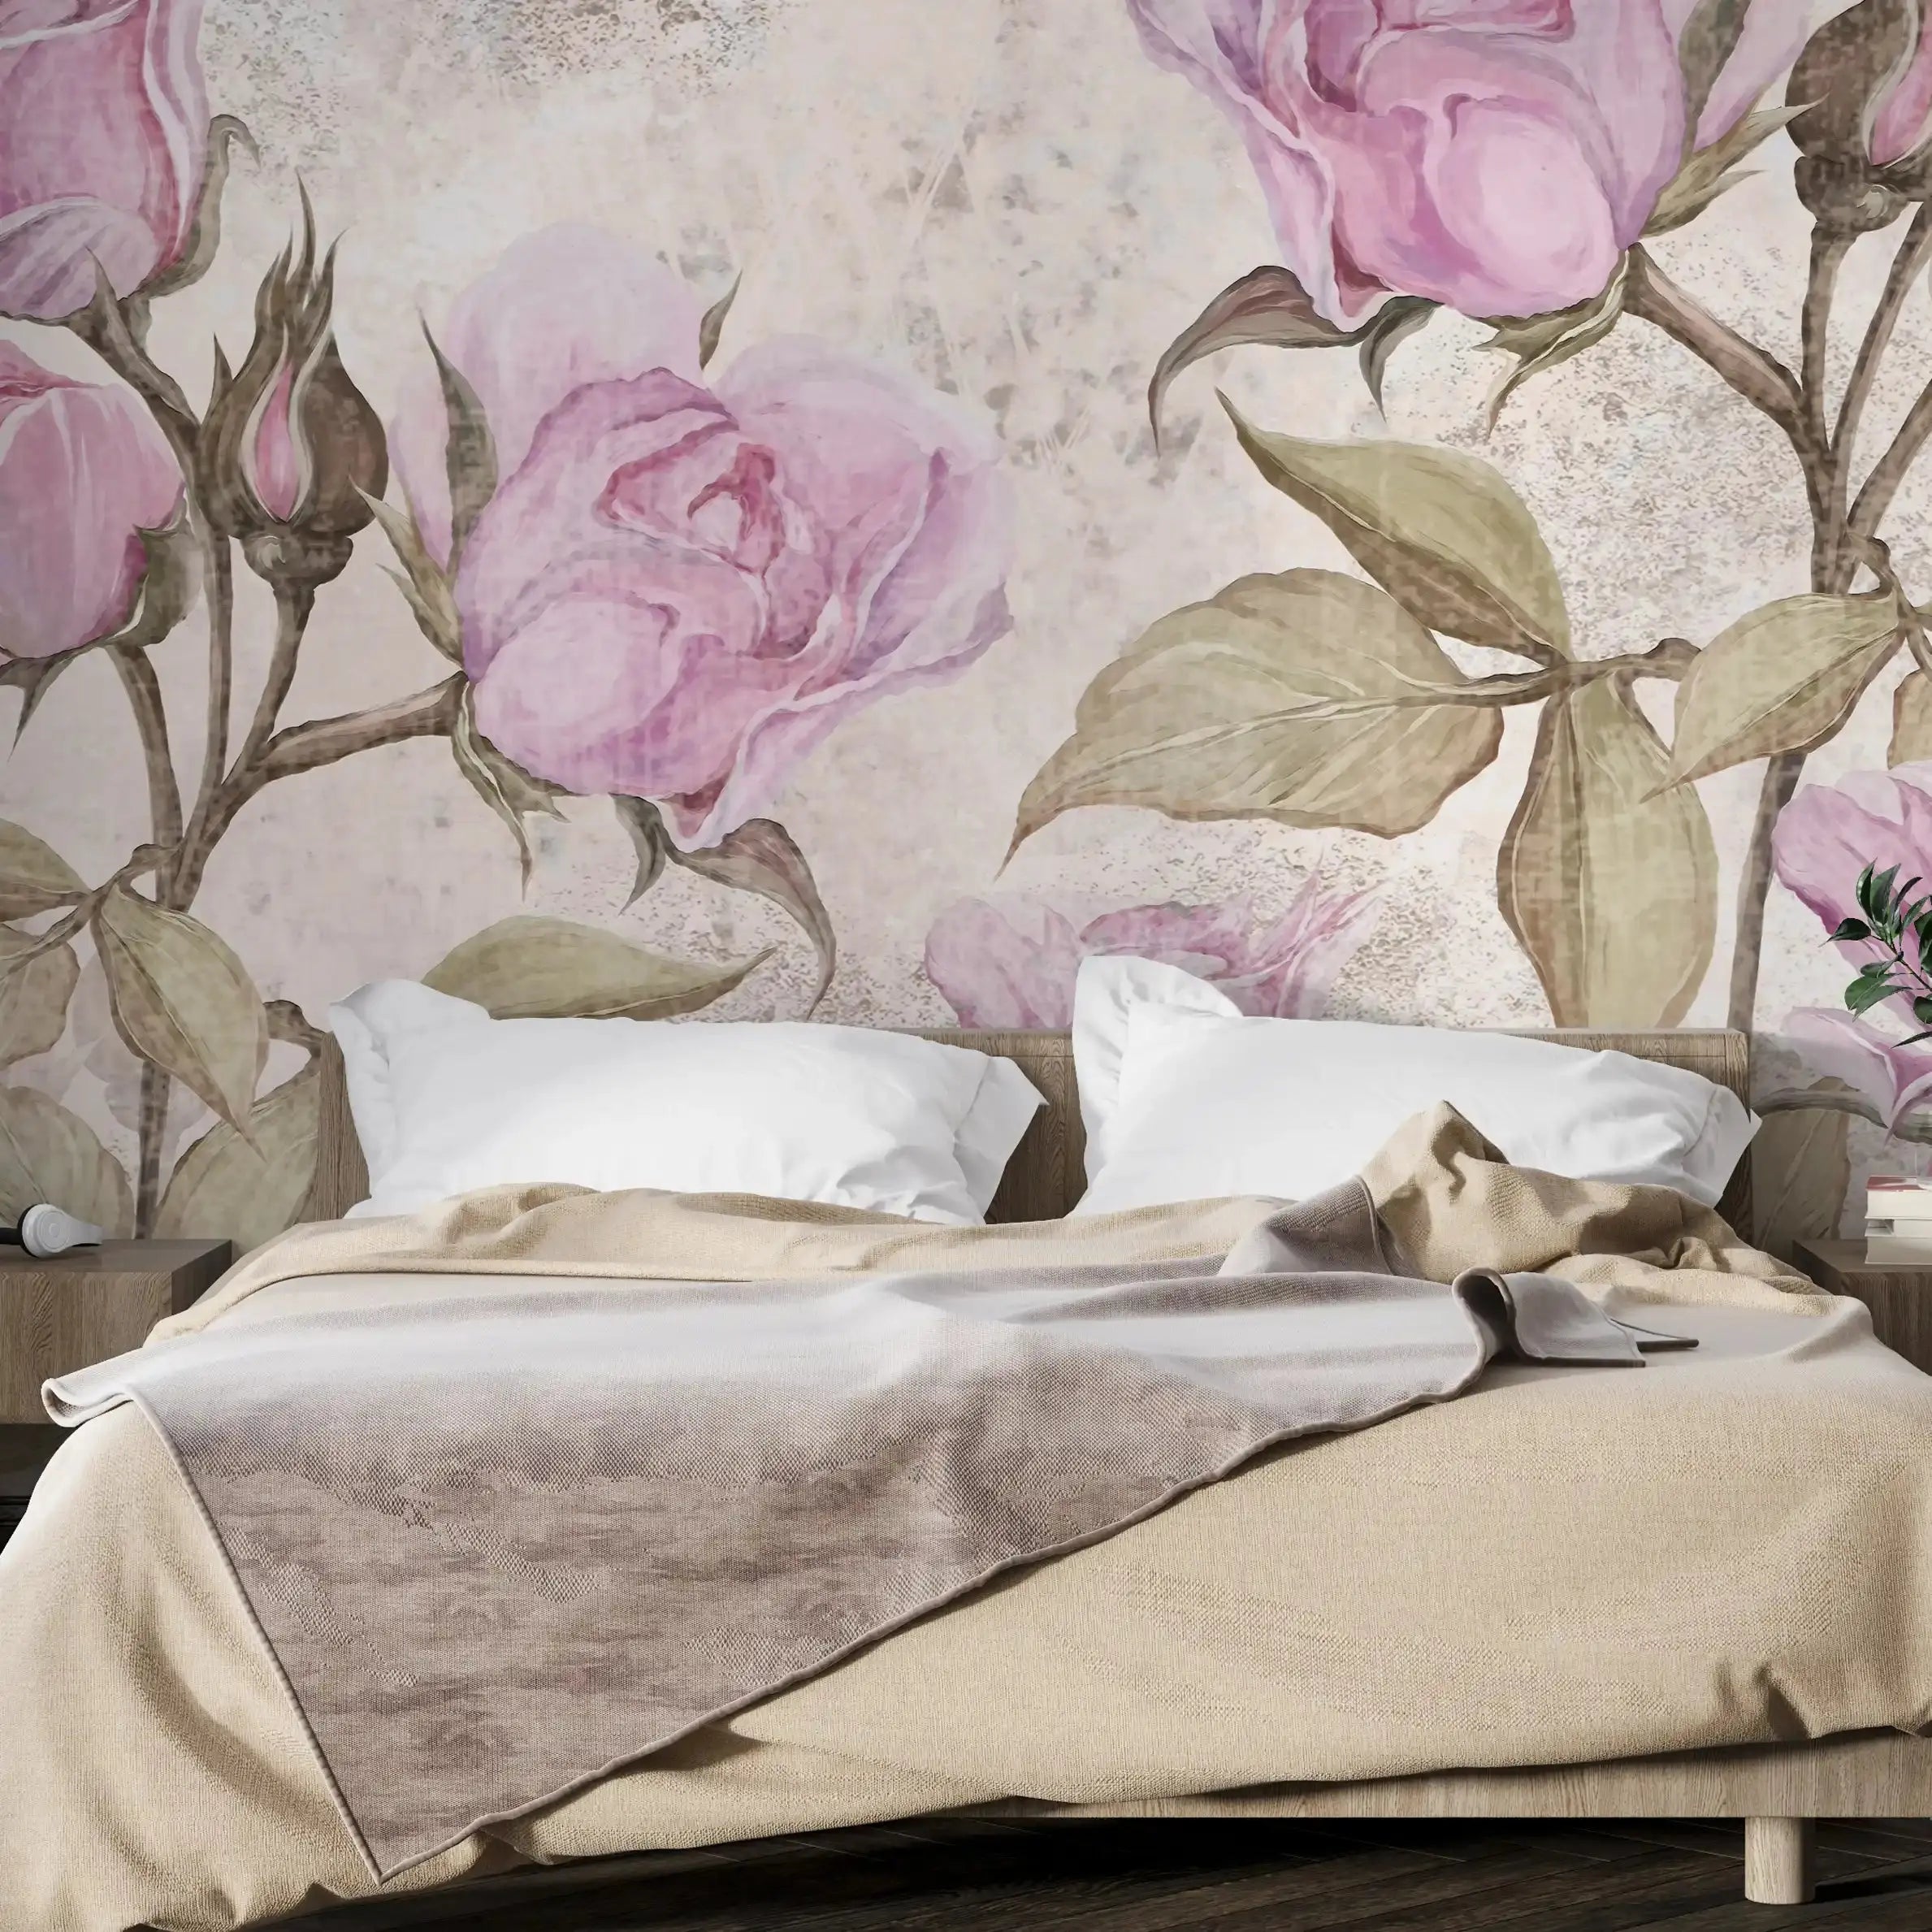 3002-A / Floral Peel and Stick Wallpaper - Pink Roses Mural, Vintage Mural for Wall Decor, Ideal for Bedroom and Bathroom - Artevella